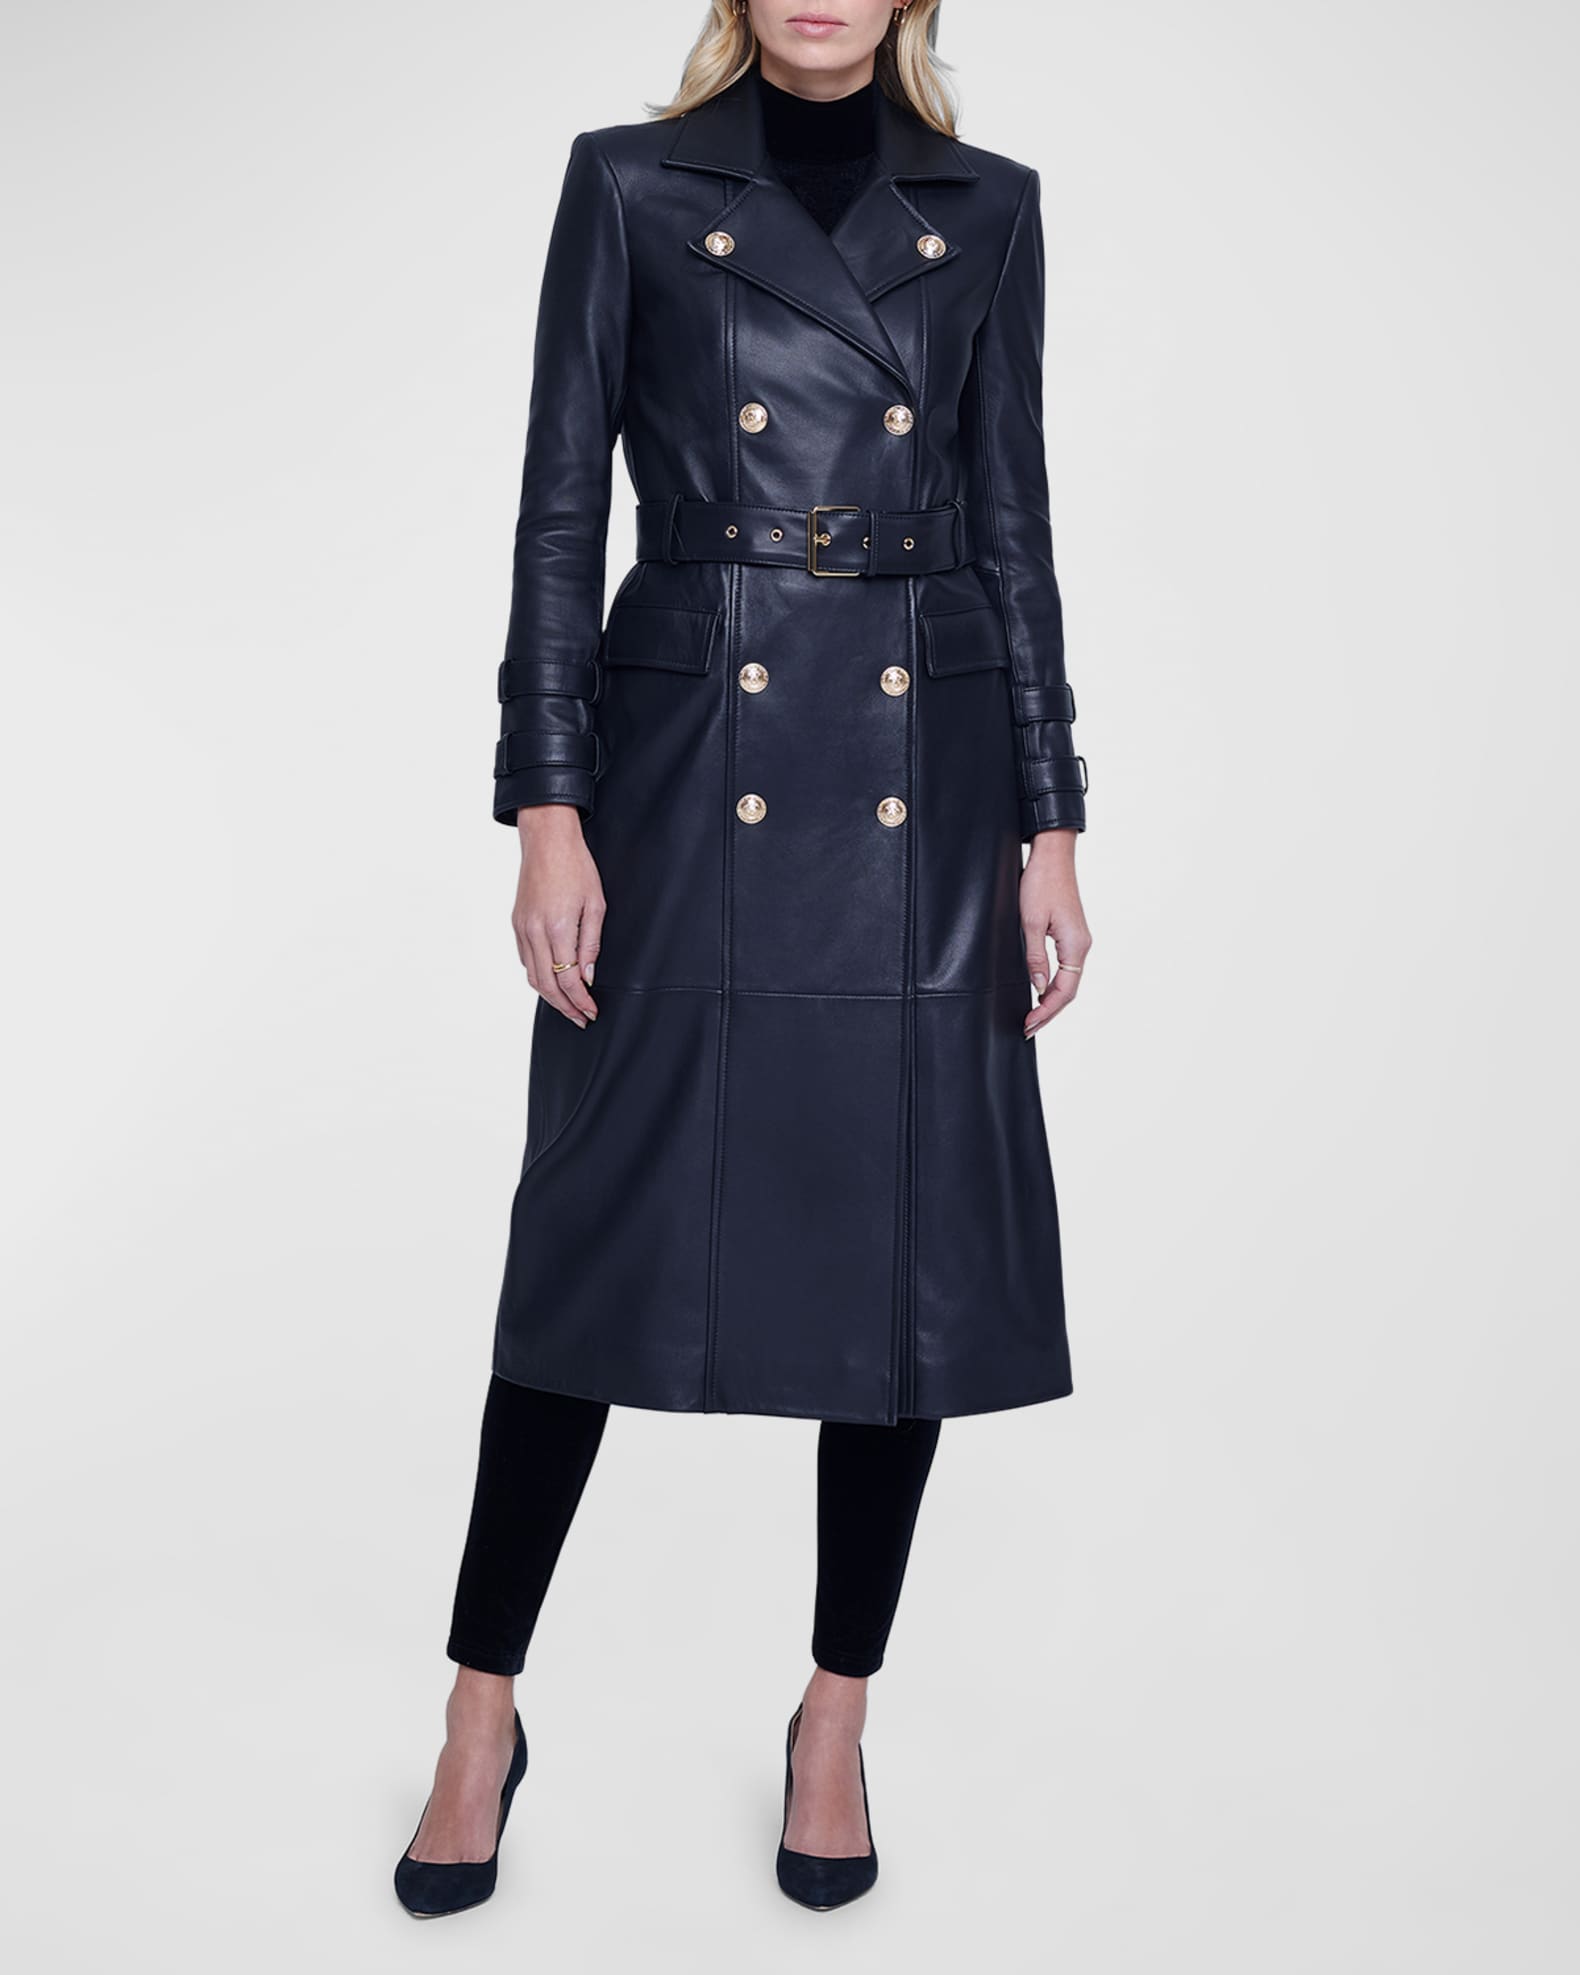 L'Agence Celina Leather Trench Coat | Neiman Marcus